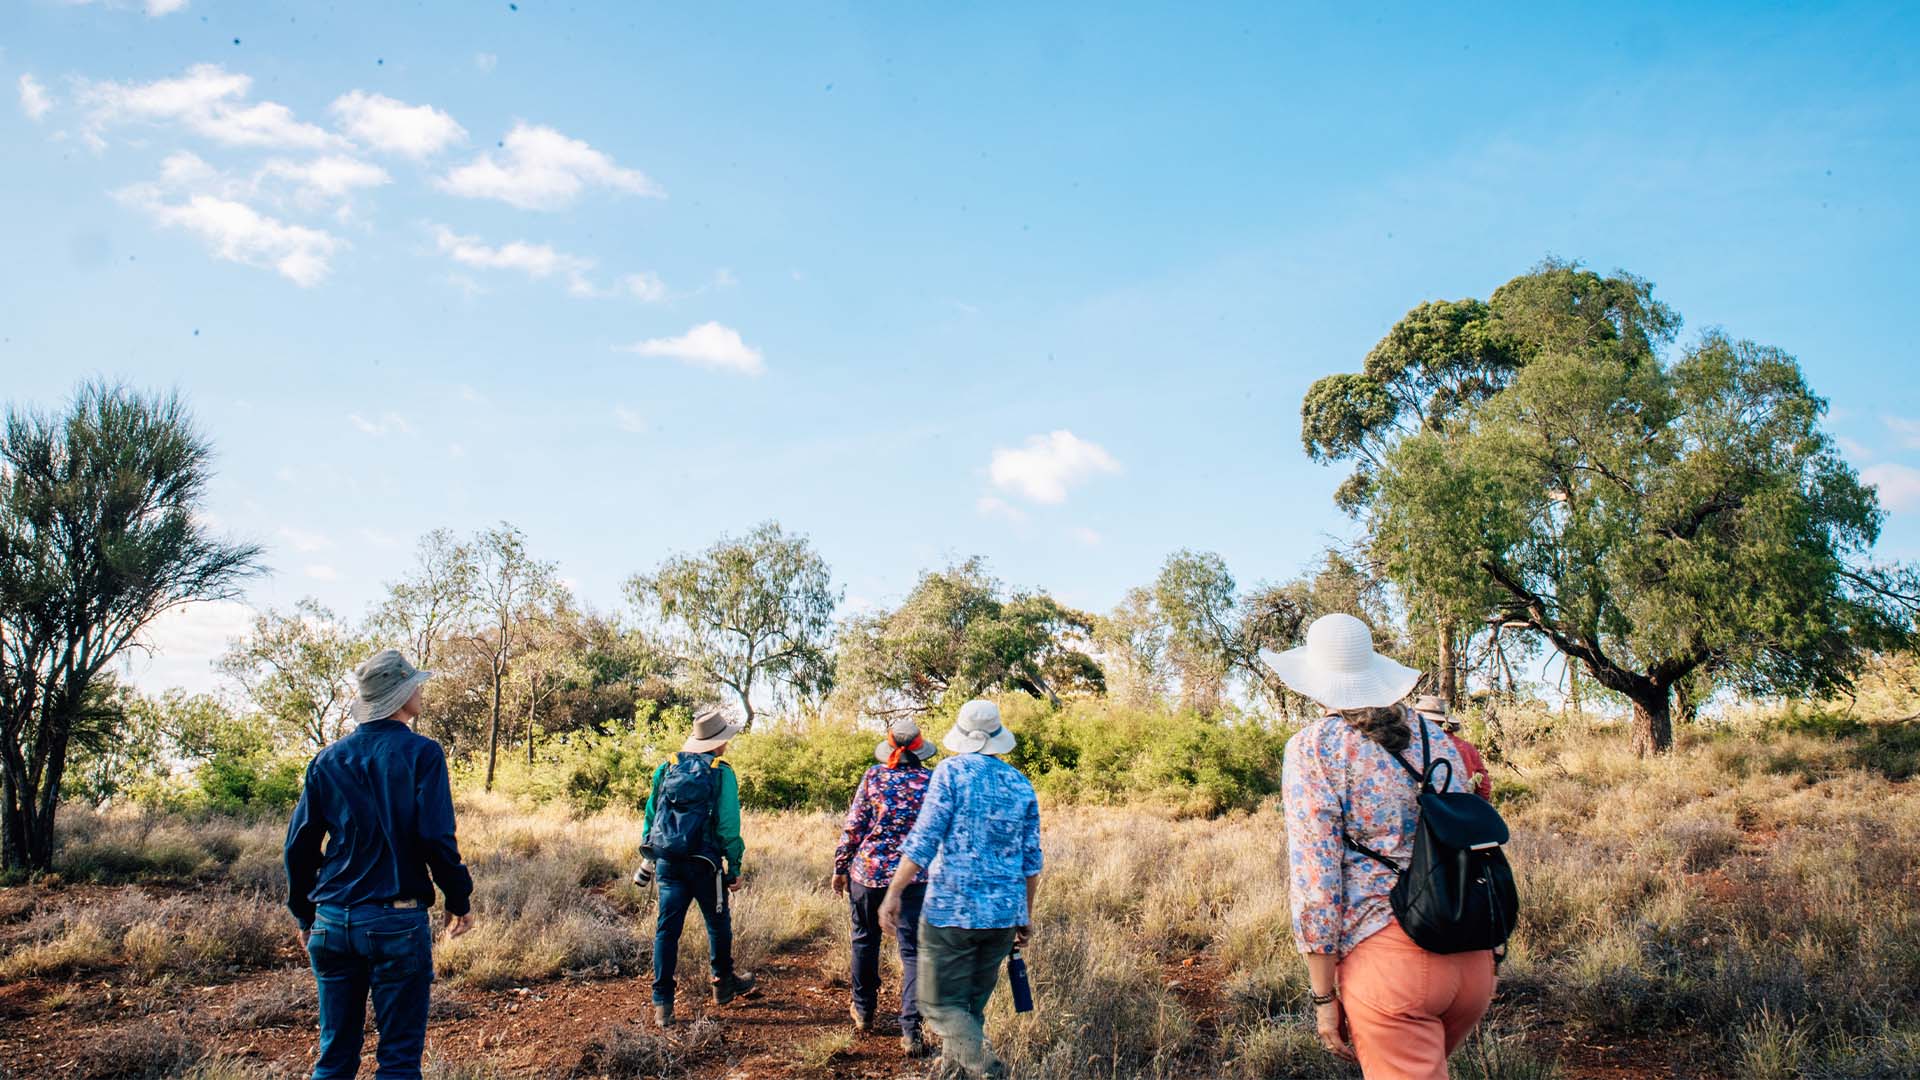 A group of people walking through bushlands